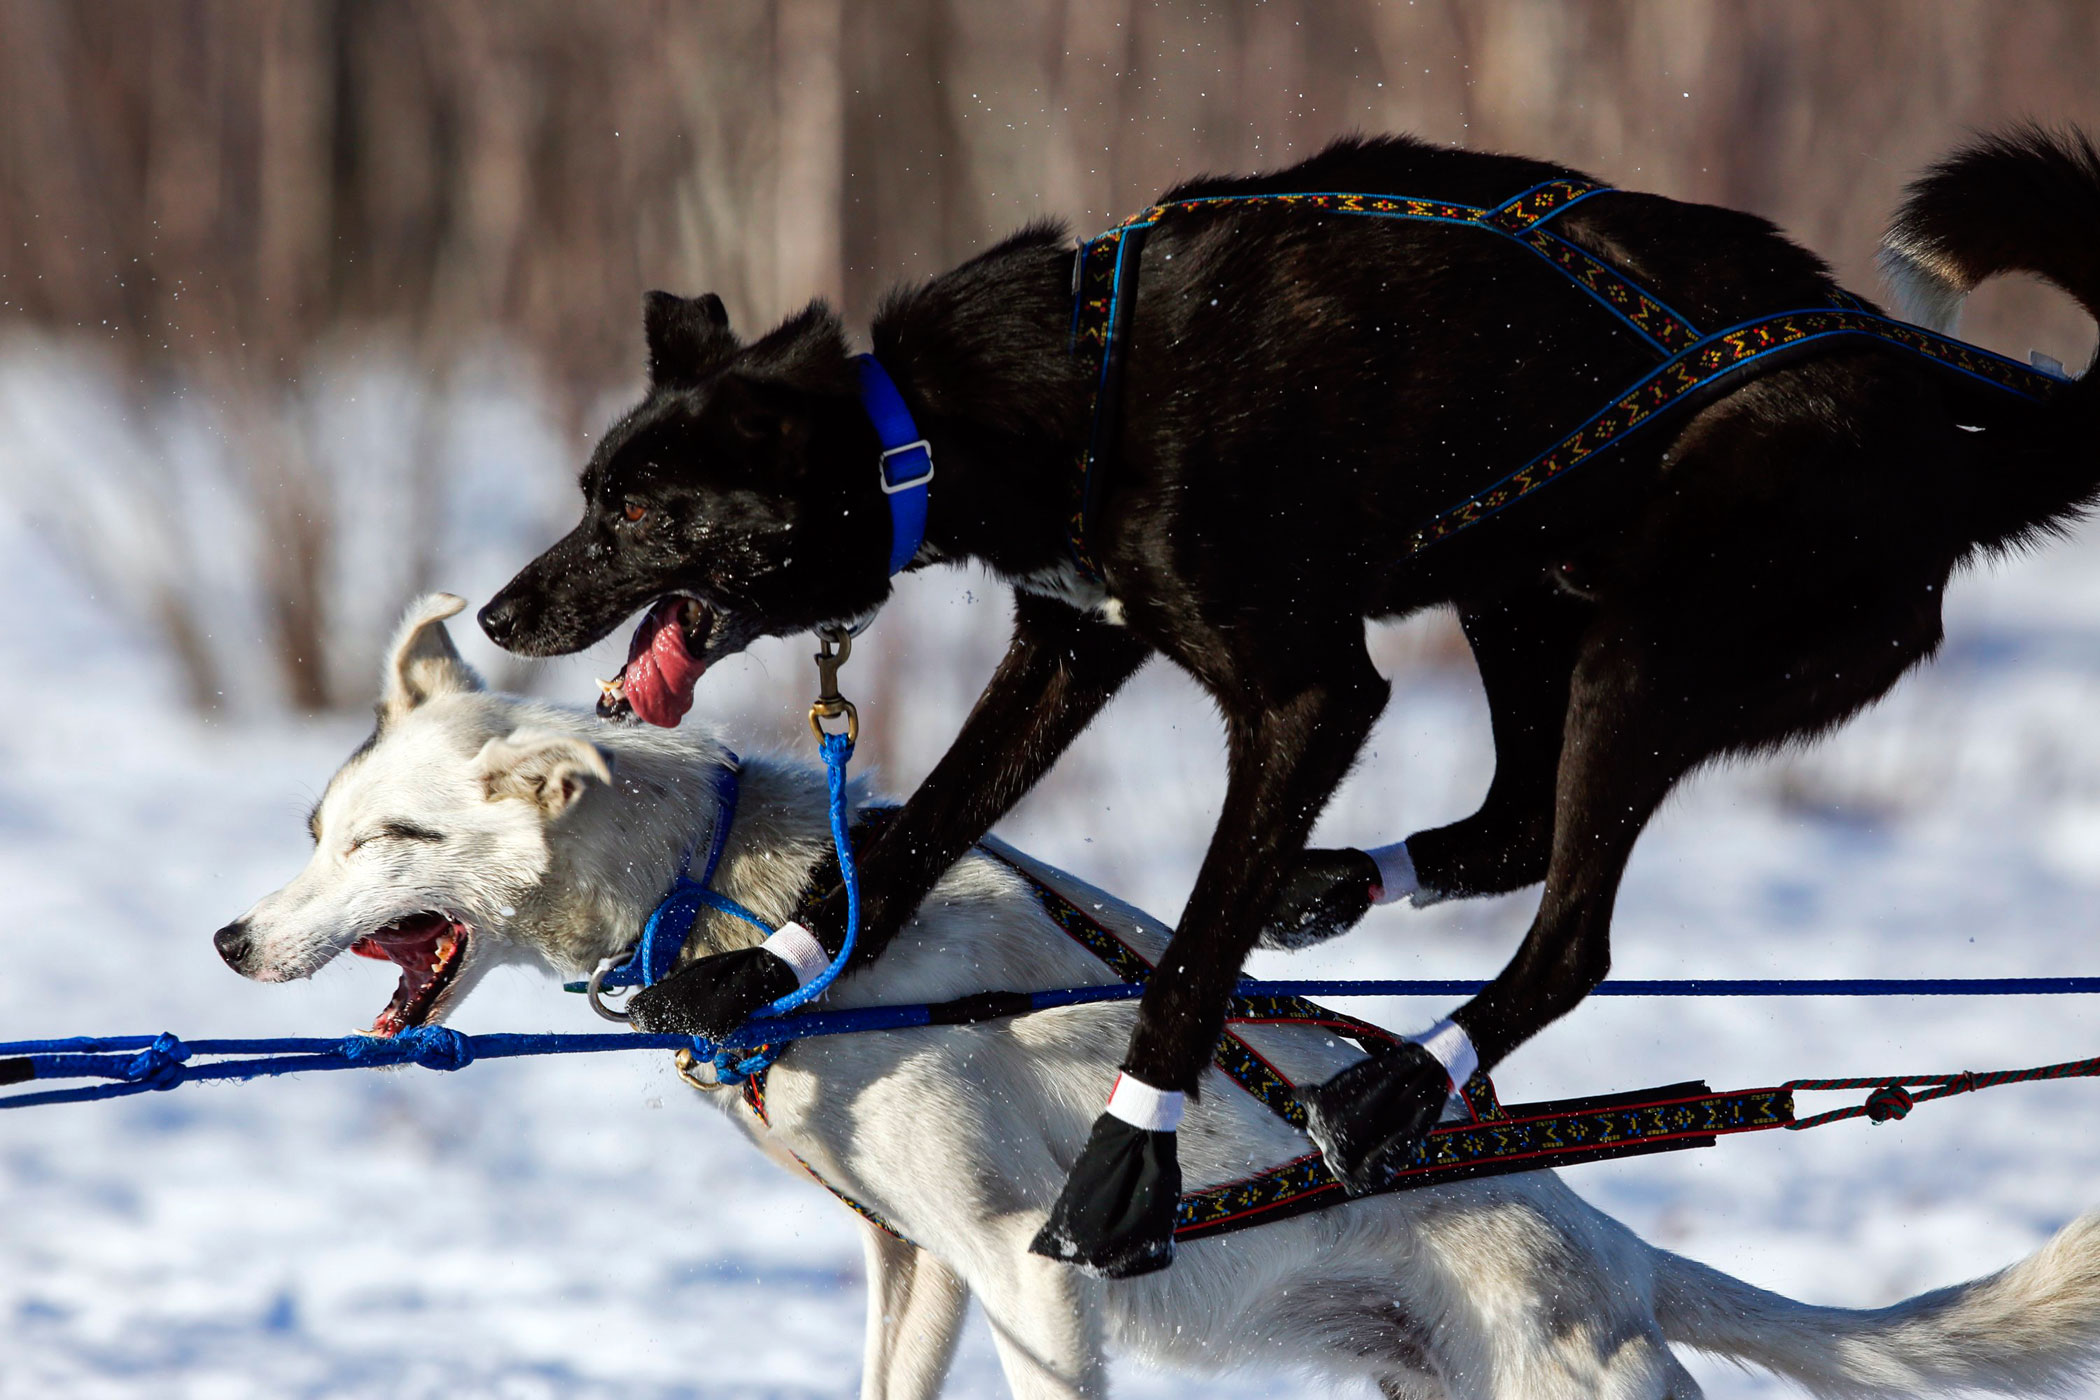 Martin Koenig's team gets tangled after leaving the start chute at the restart of the Iditarod Trail Sled Dog Race in Willow, Alaska on March 6.